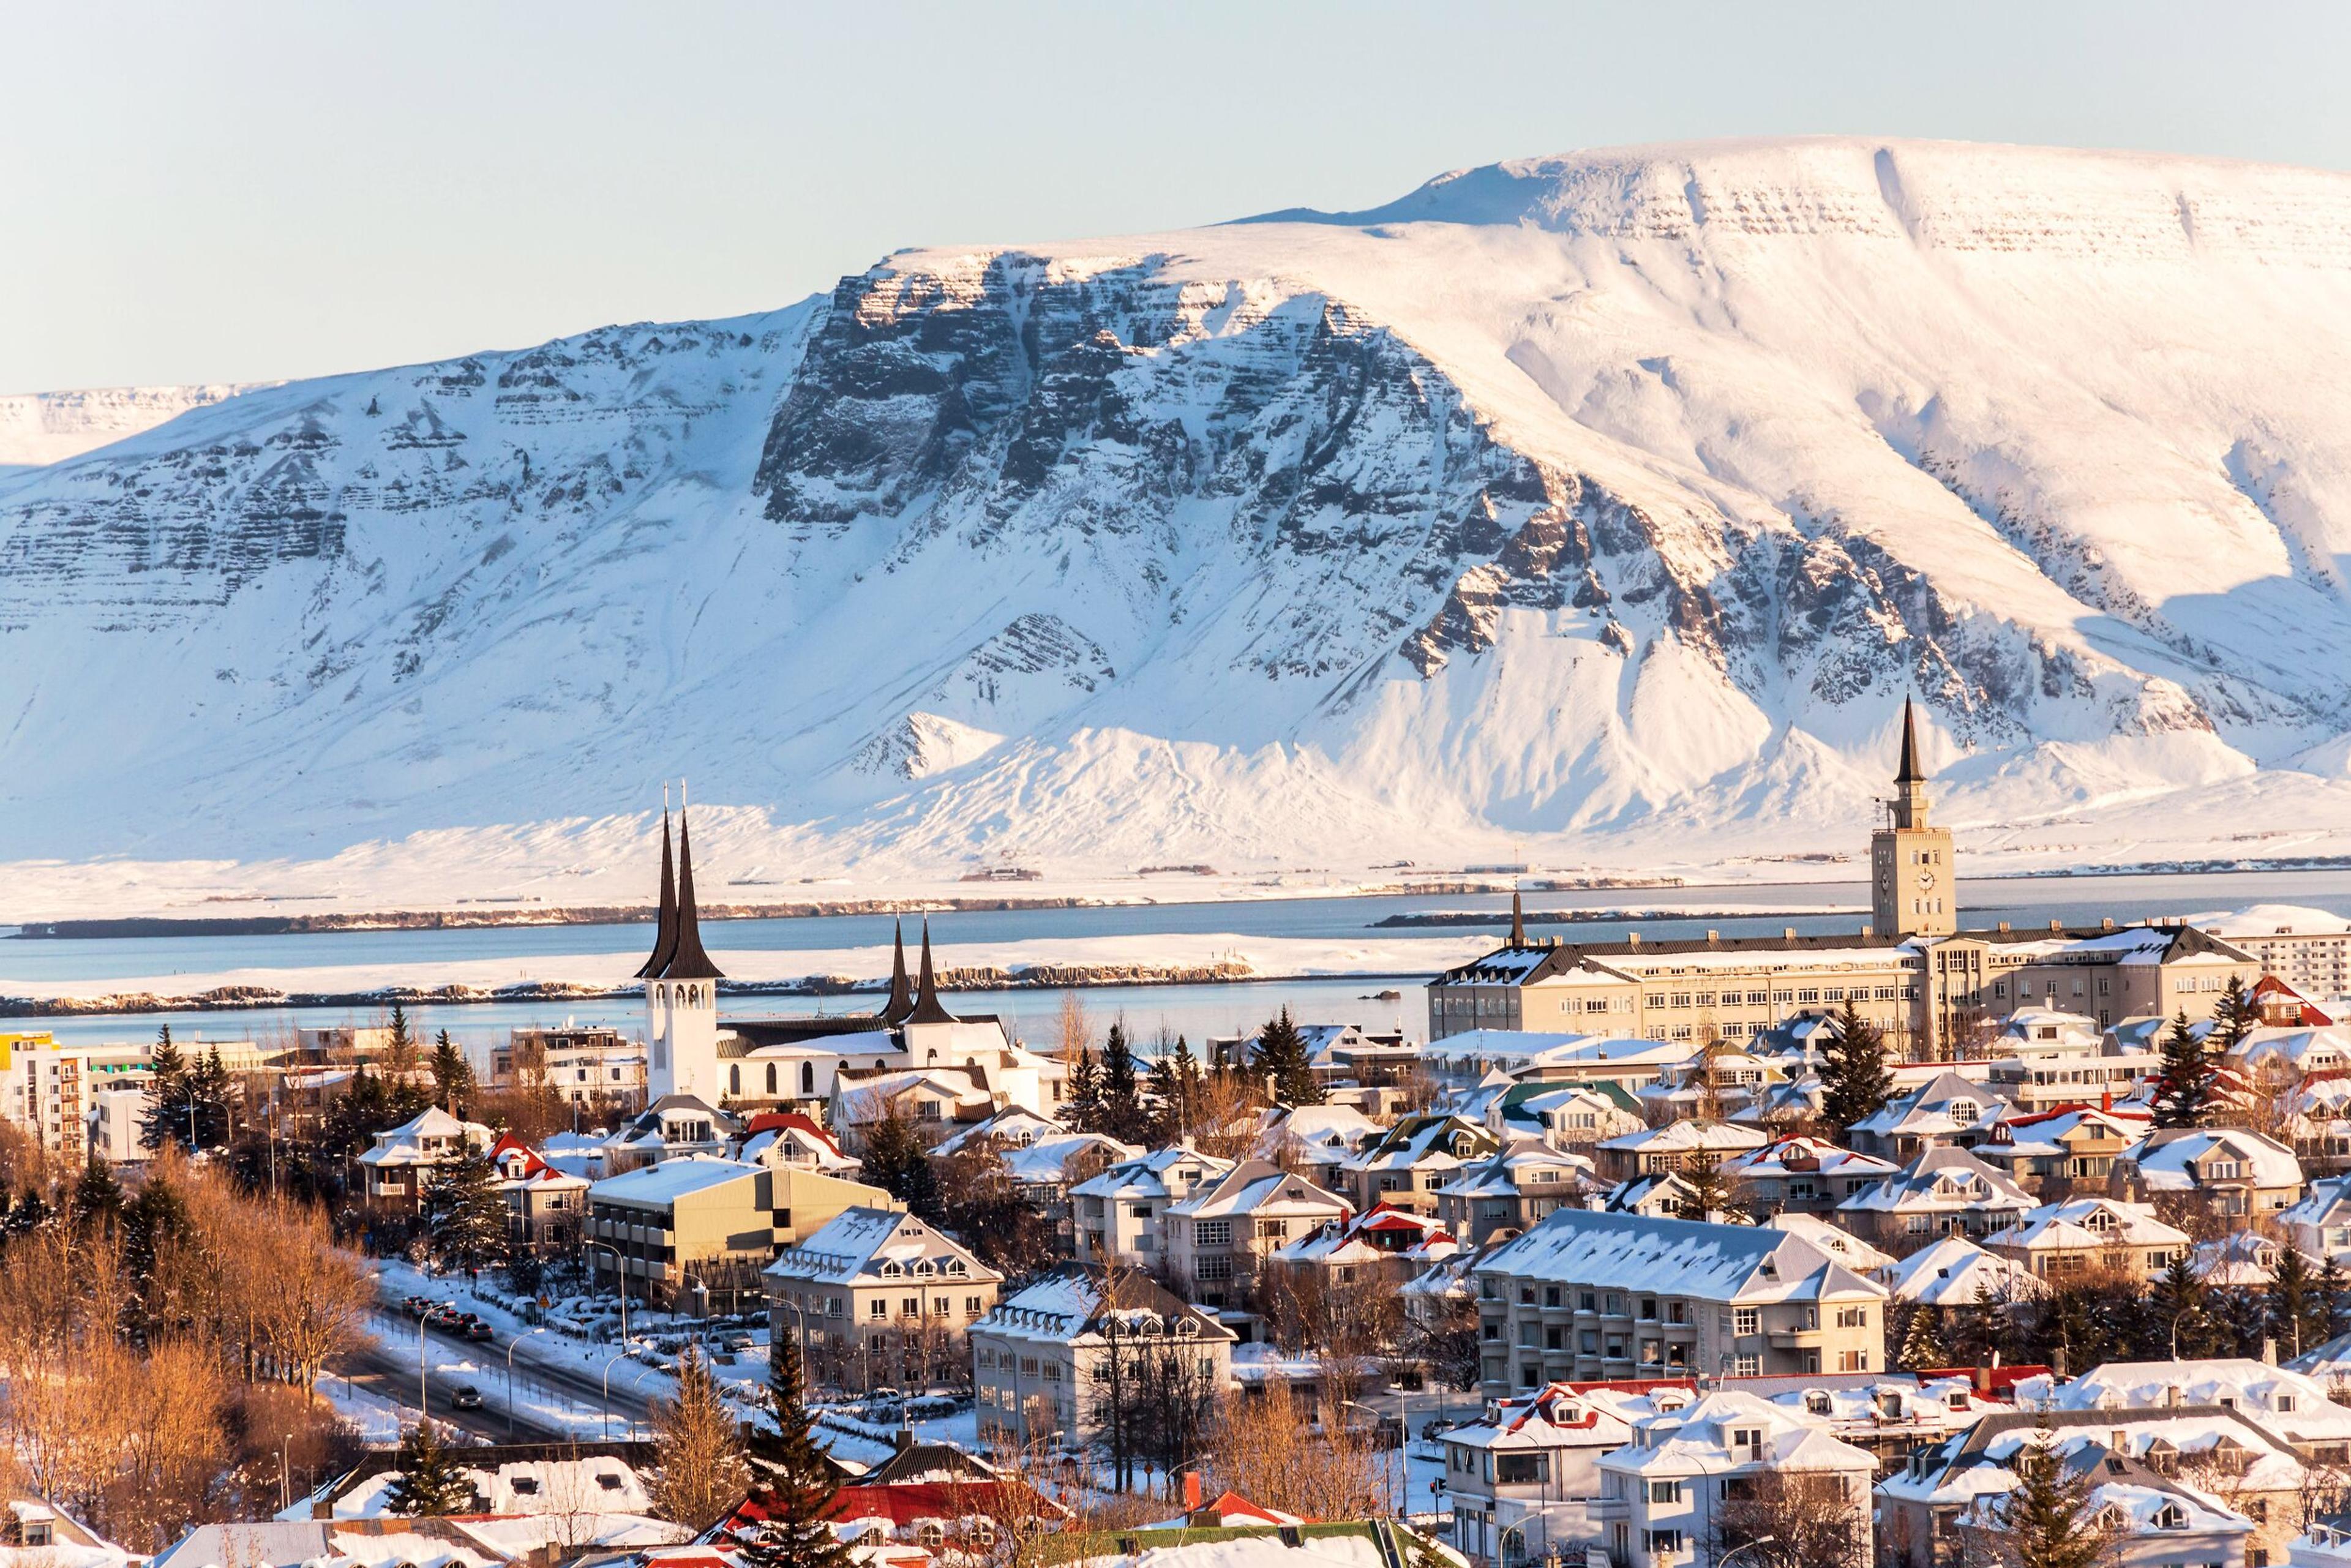 A winter view of Reykjavik, with its iconic Hallgrímskirkja church, colorful houses, and a snow-covered mountain backdrop